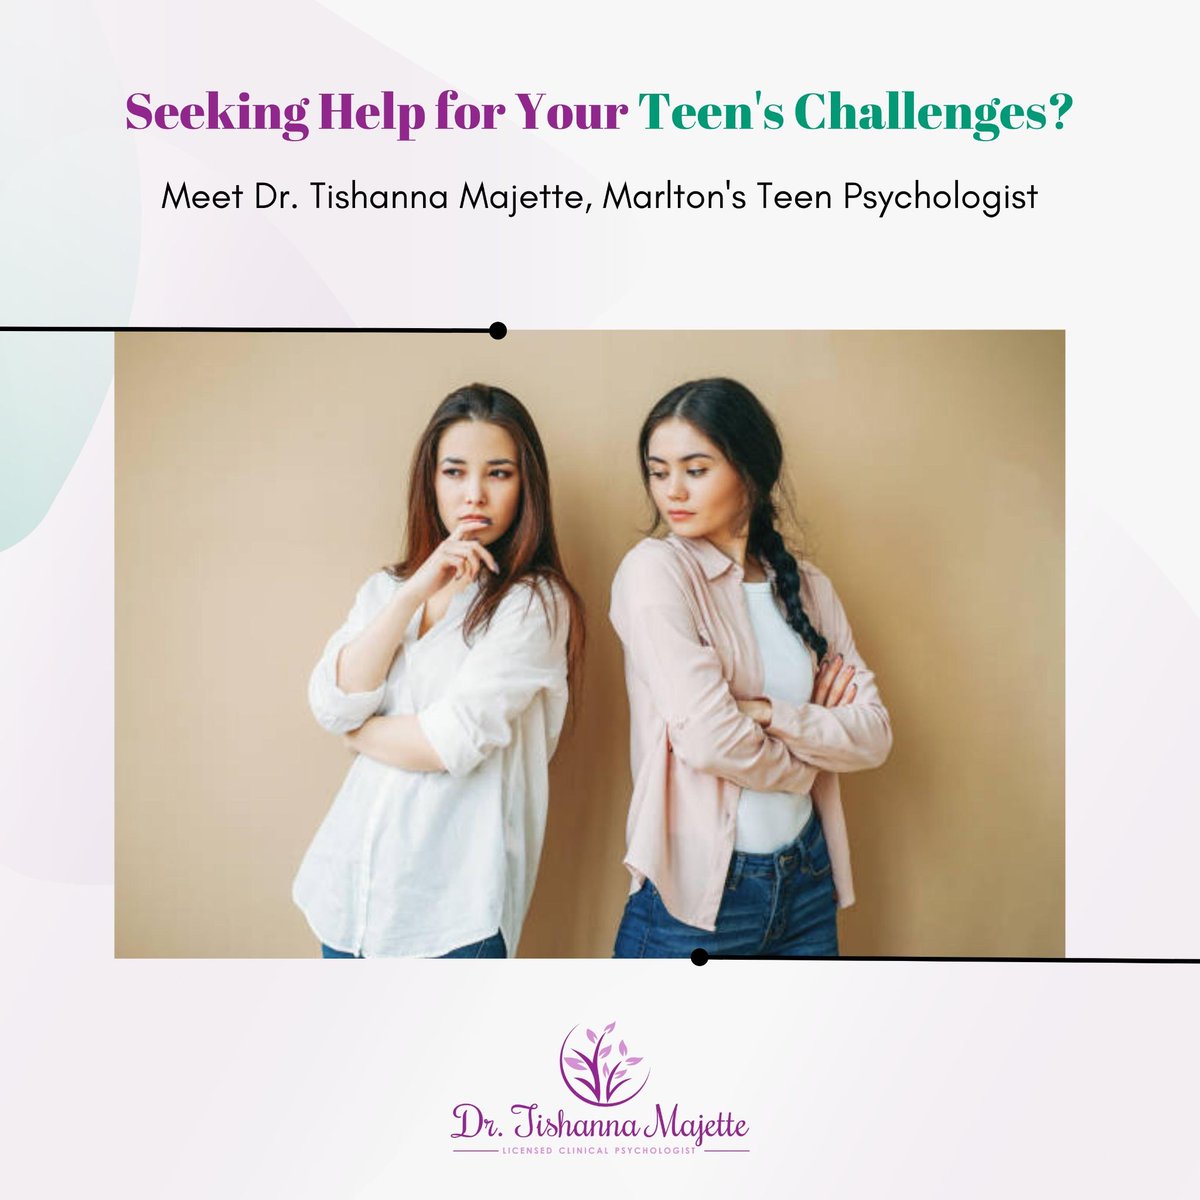 Struggling with your teen's mental health? The pressures of cyberbullying, self-image, and academics can be overwhelming. 
.
#TeenPsychologist #MentalHealthMatters #MarltonTherapy #AdolescentTherapy #SupportForTeens